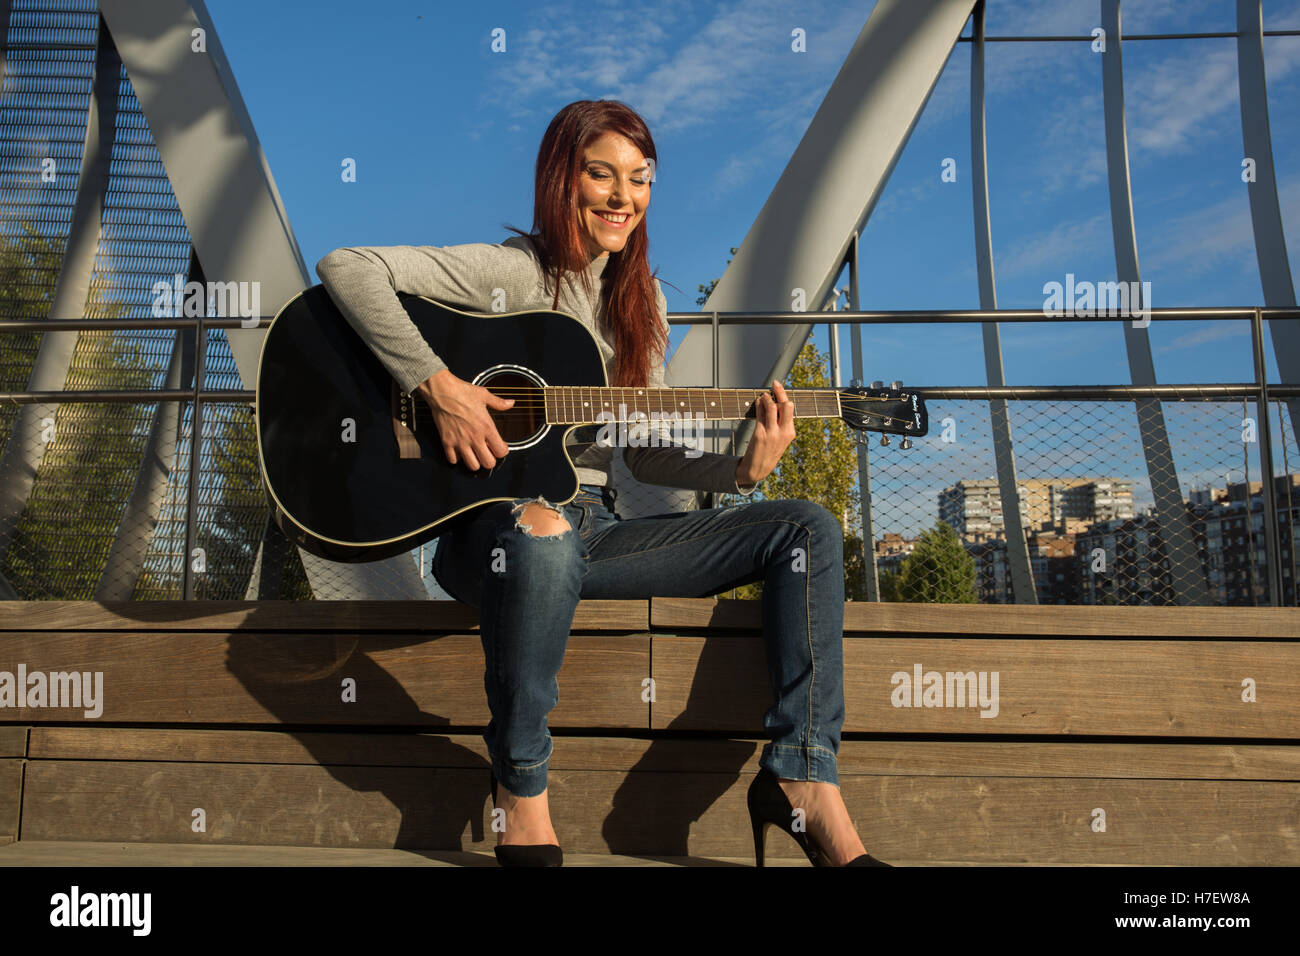 Attractive Smiling Musician Posing With Acoustic Guitar Free Stock Photo  and Image 219218850